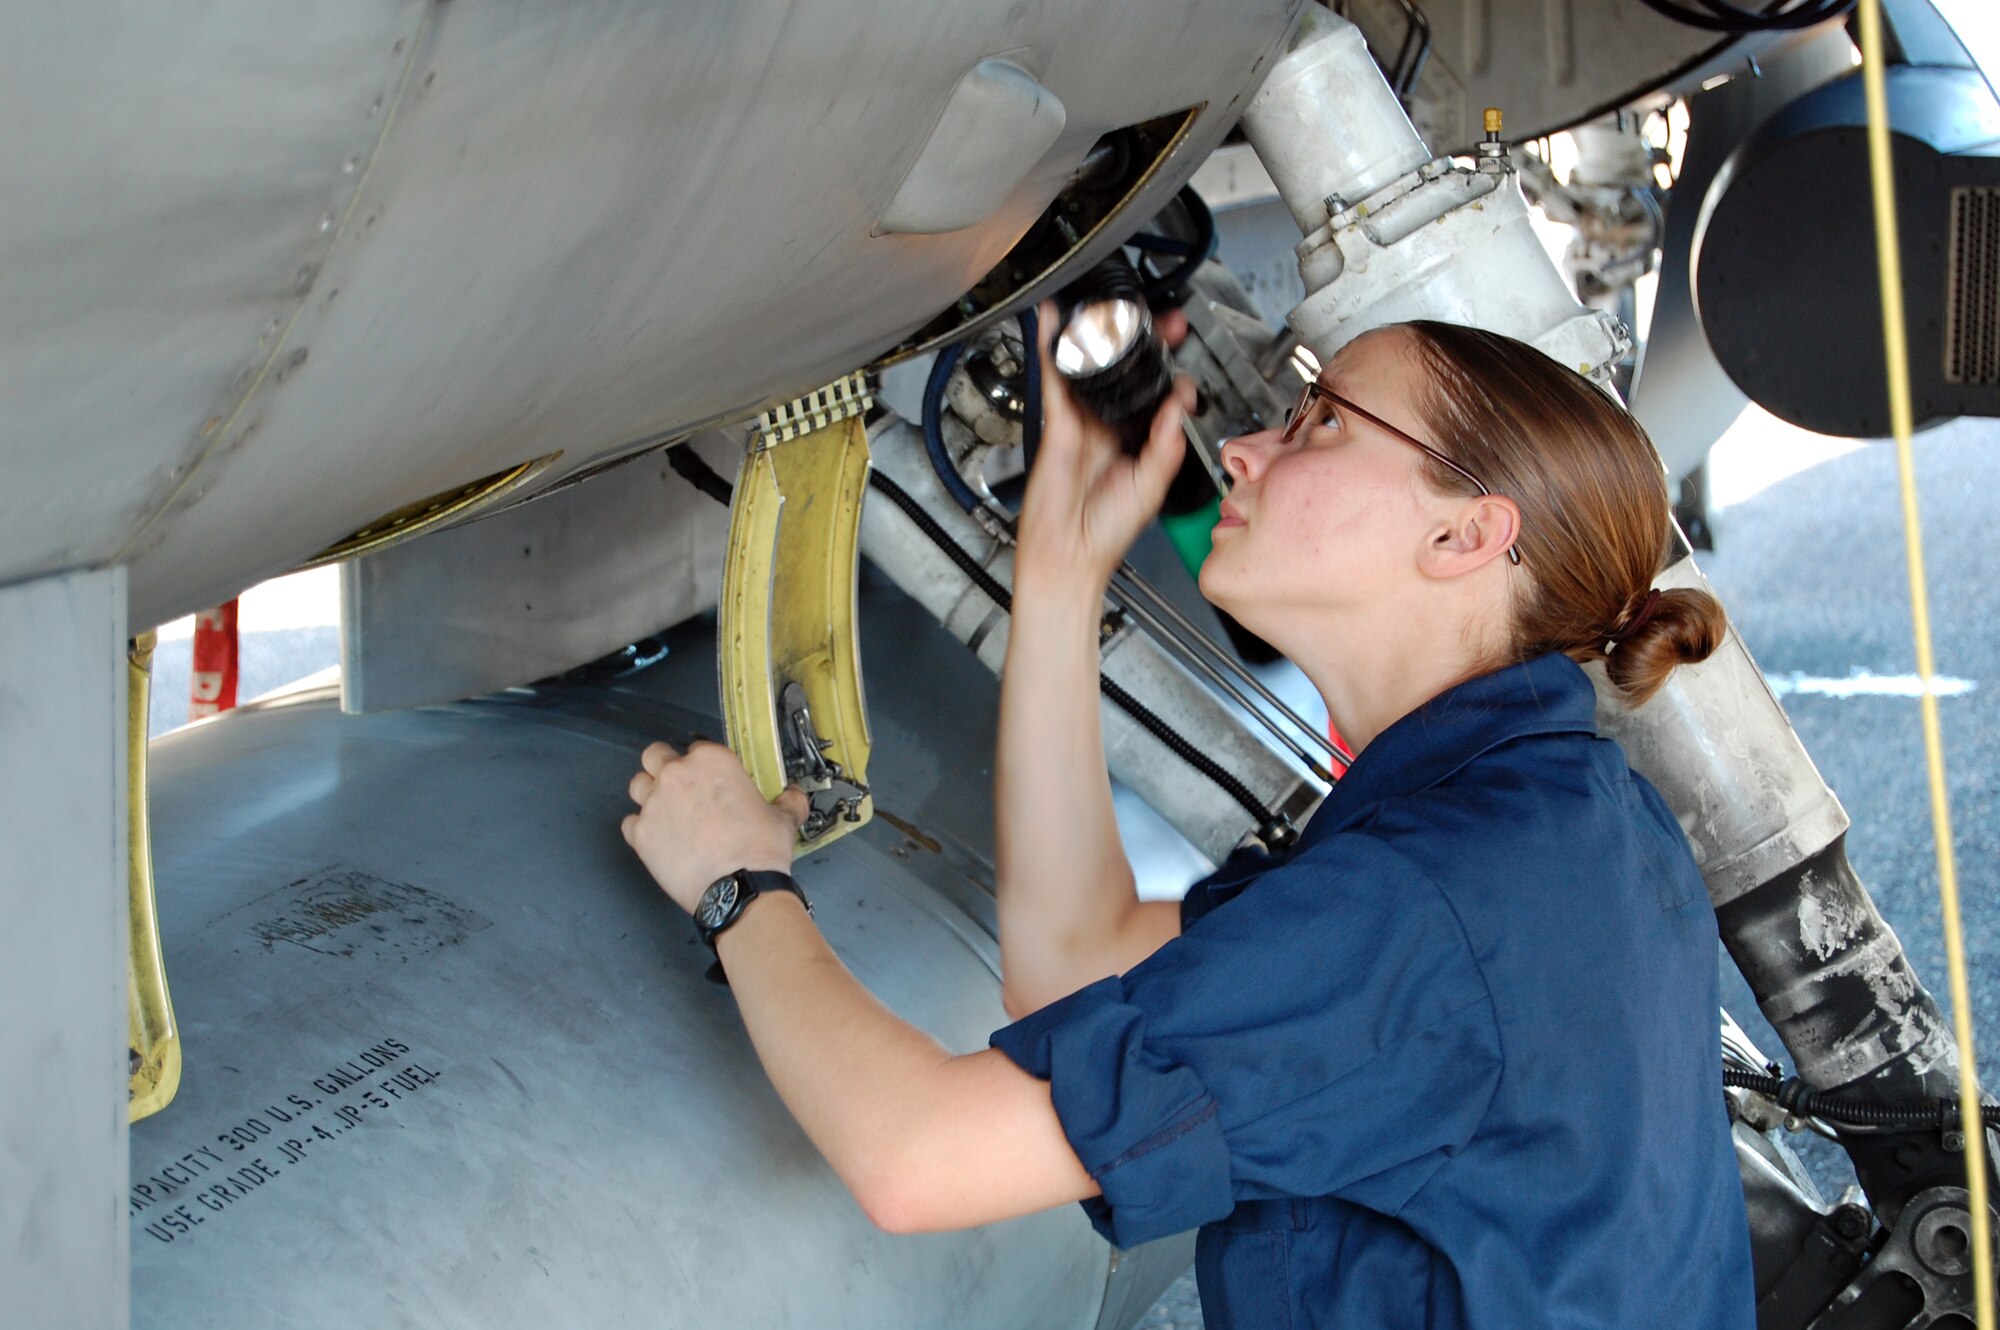 Airman 1st Class Kristin Frazier, 31st Aircraft Maintenance Squadron crew chief, conducts a post flight inspection on an F-16 Aug. 5, 2010 at Kallax Air Base, Sweden. The 555th Fighter Squadron and 31st AMXS conducted more than 180 air-to-air and air-to-ground missions during a two week exercise at the air base in which they worked alongside the Swedish air force's Norrbotten Wing. (U.S. Air Force photo by Tech. Sgt. Lindsey Maurice/Released)